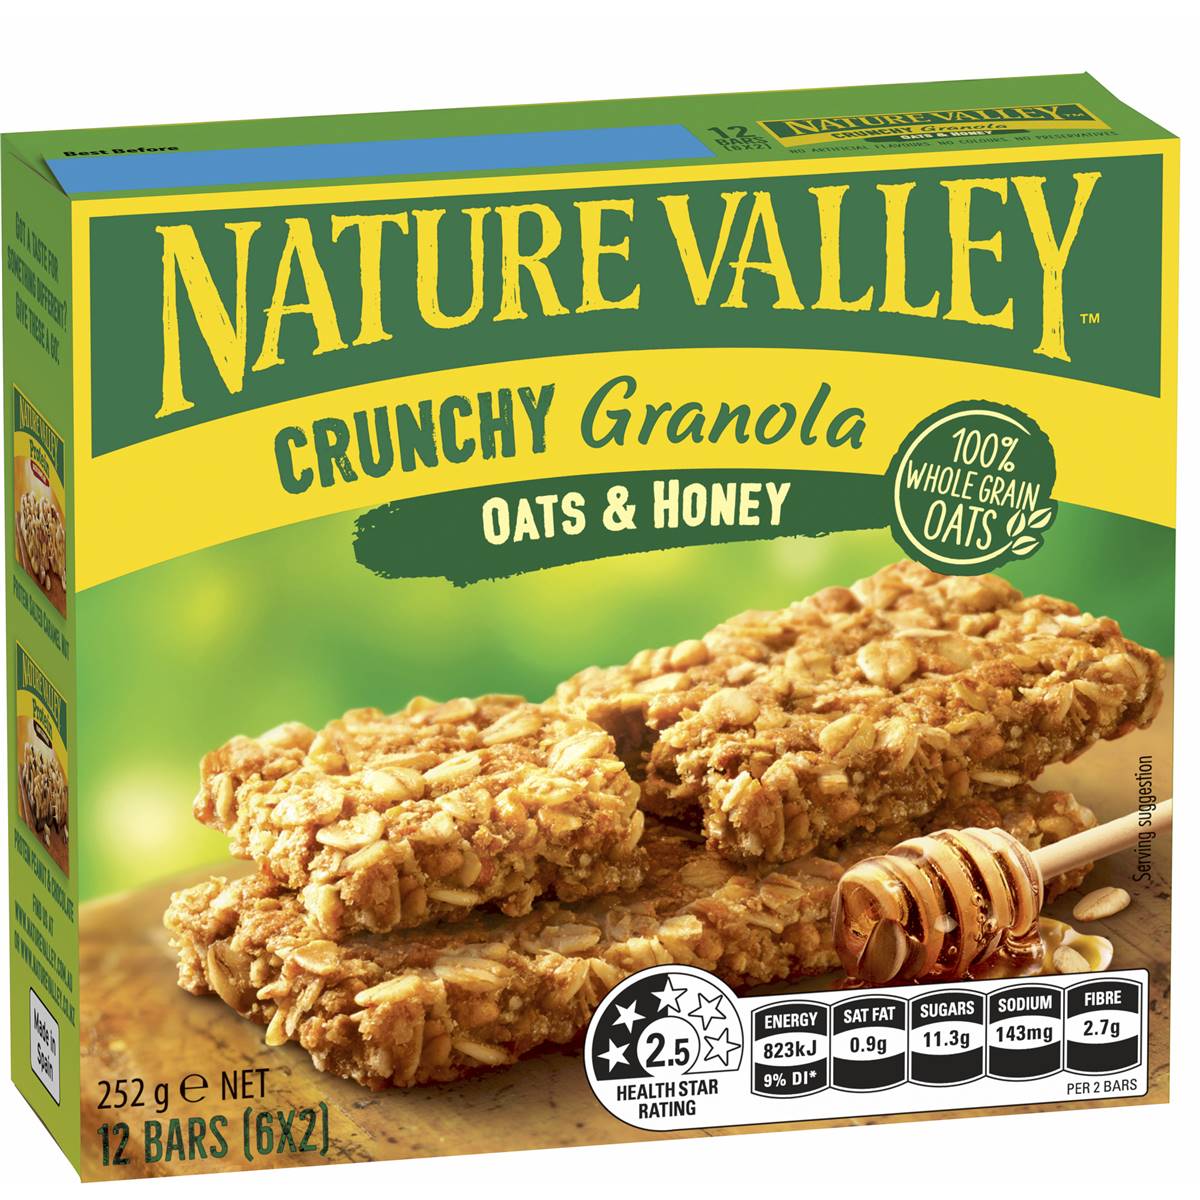 Calories in Nature Valley Crunchy Bars Oats & Honey